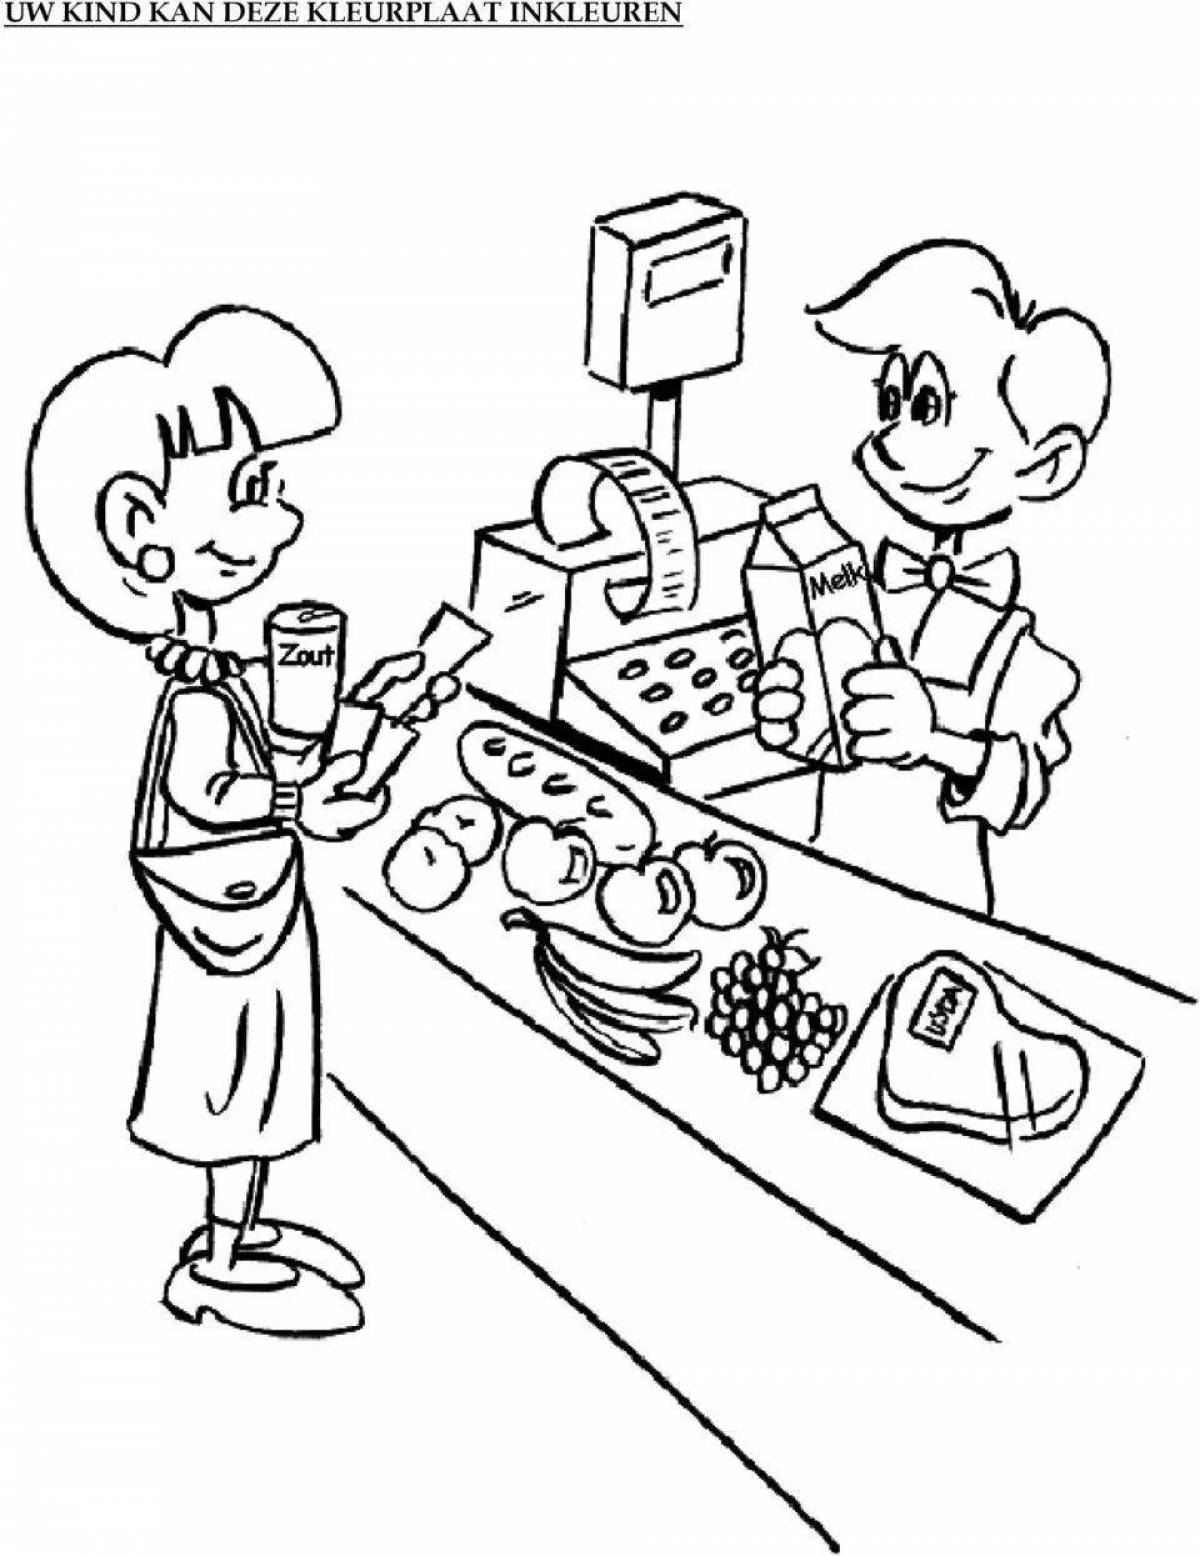 Financial literacy coloring book for primary school children